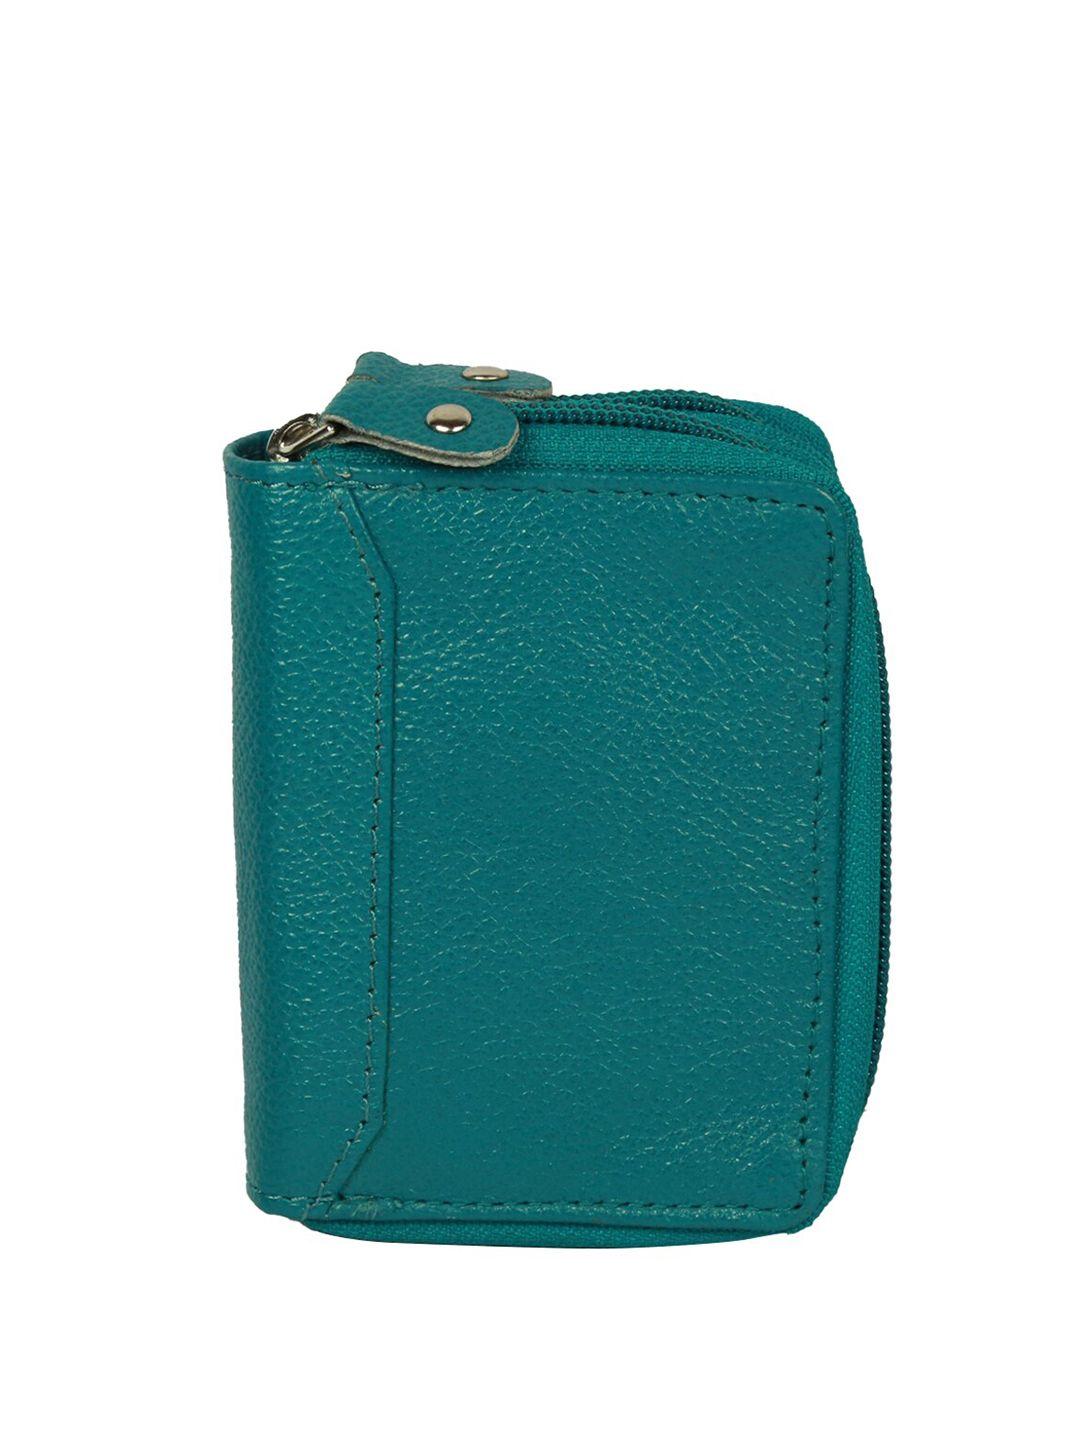 style shoes unisex teal leather card holder